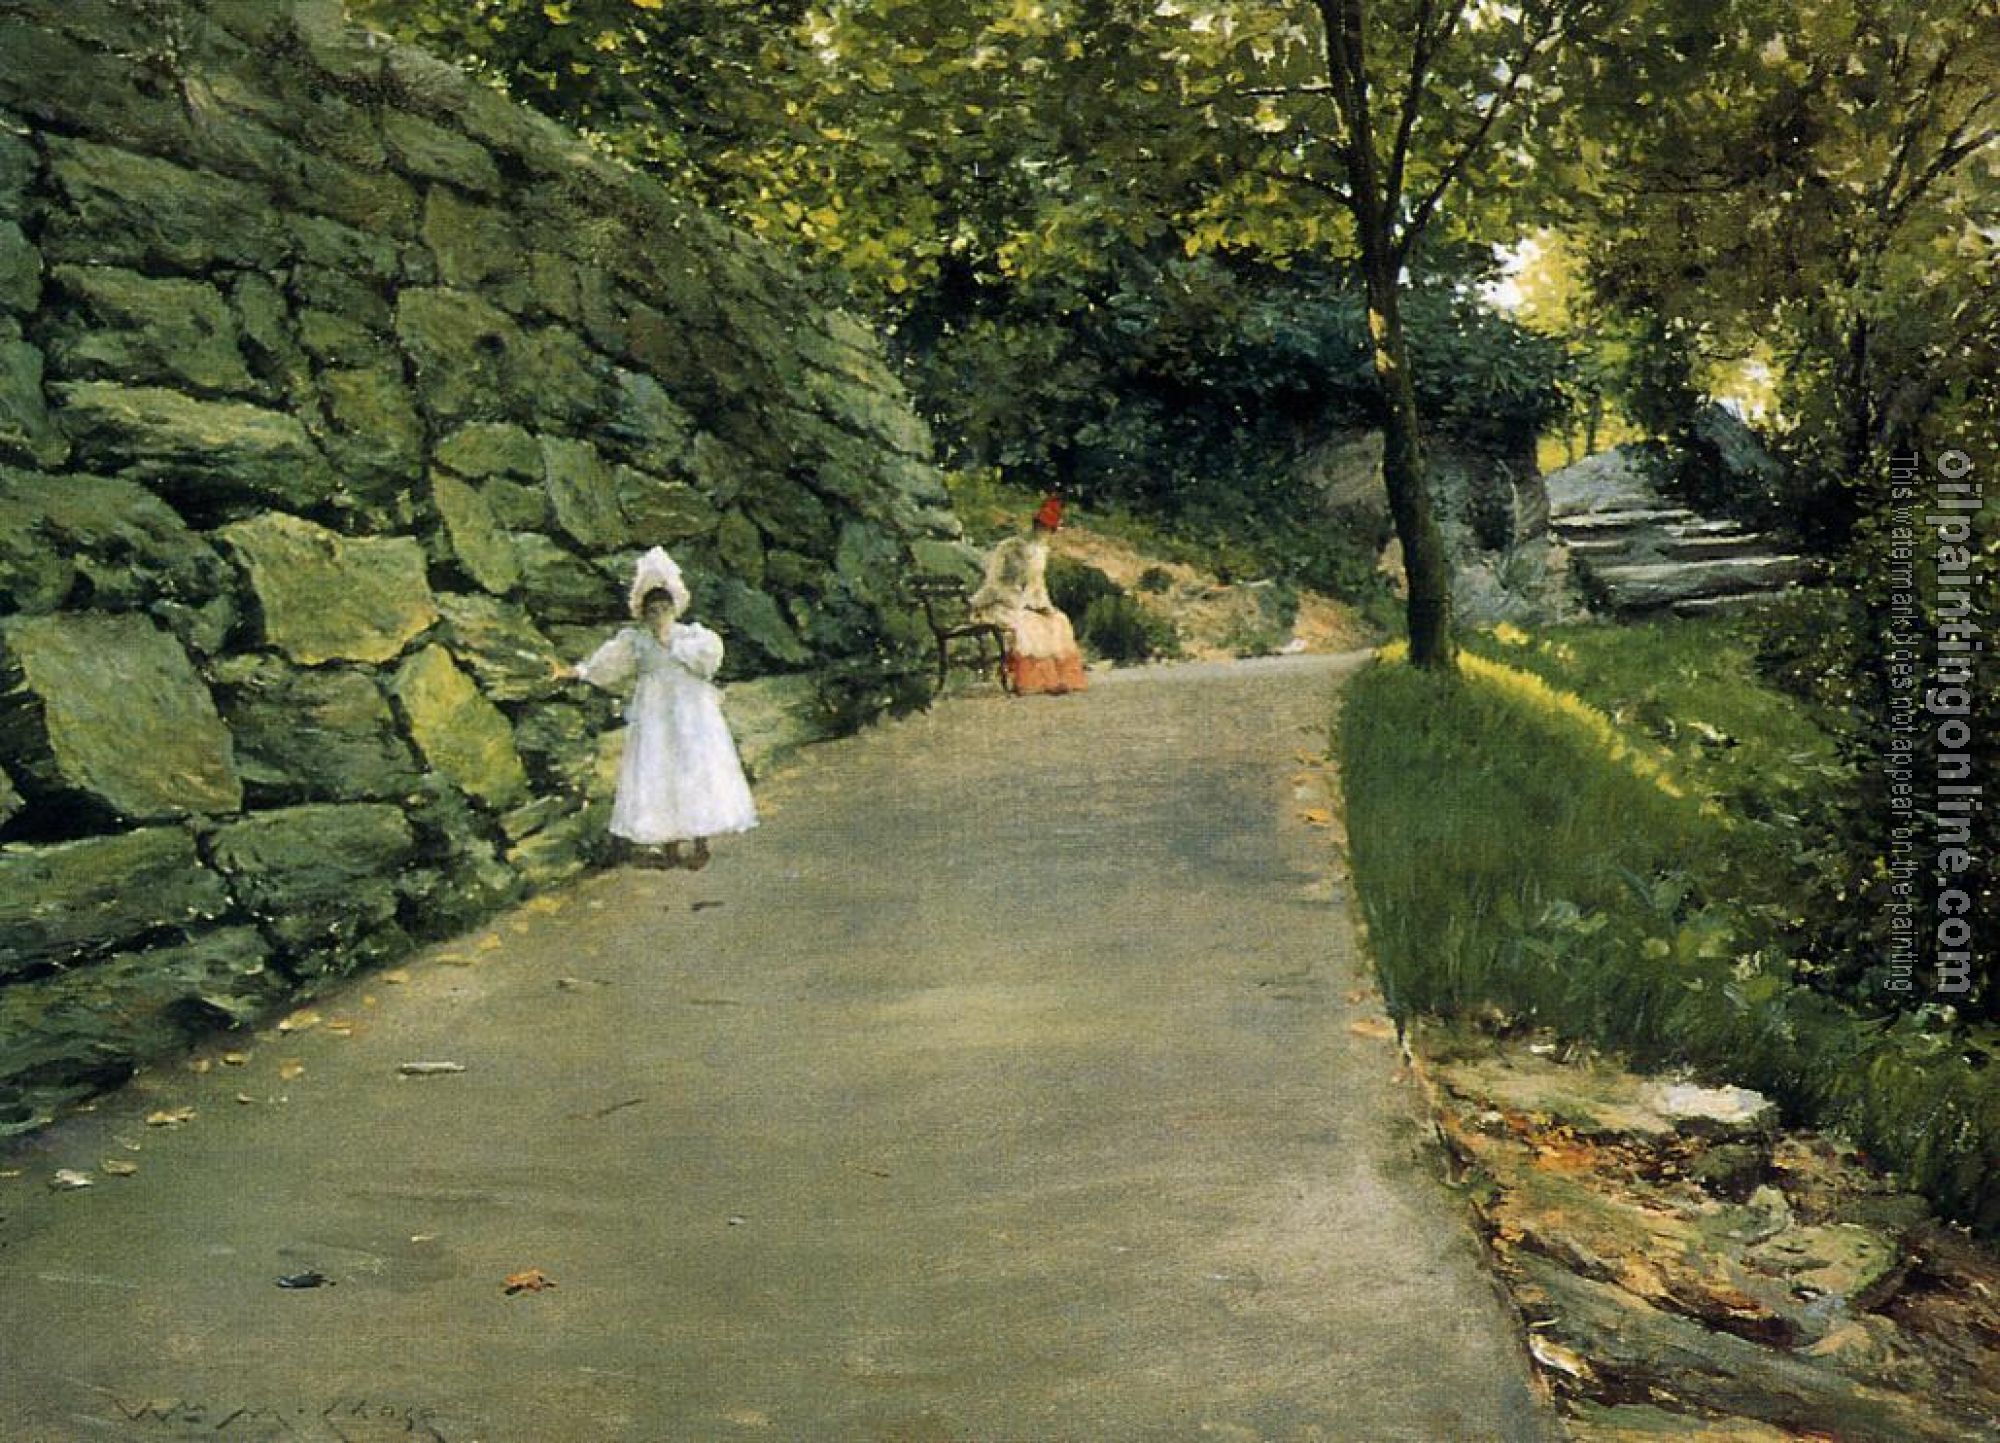 Chase, William Merritt - In the Park a By Path